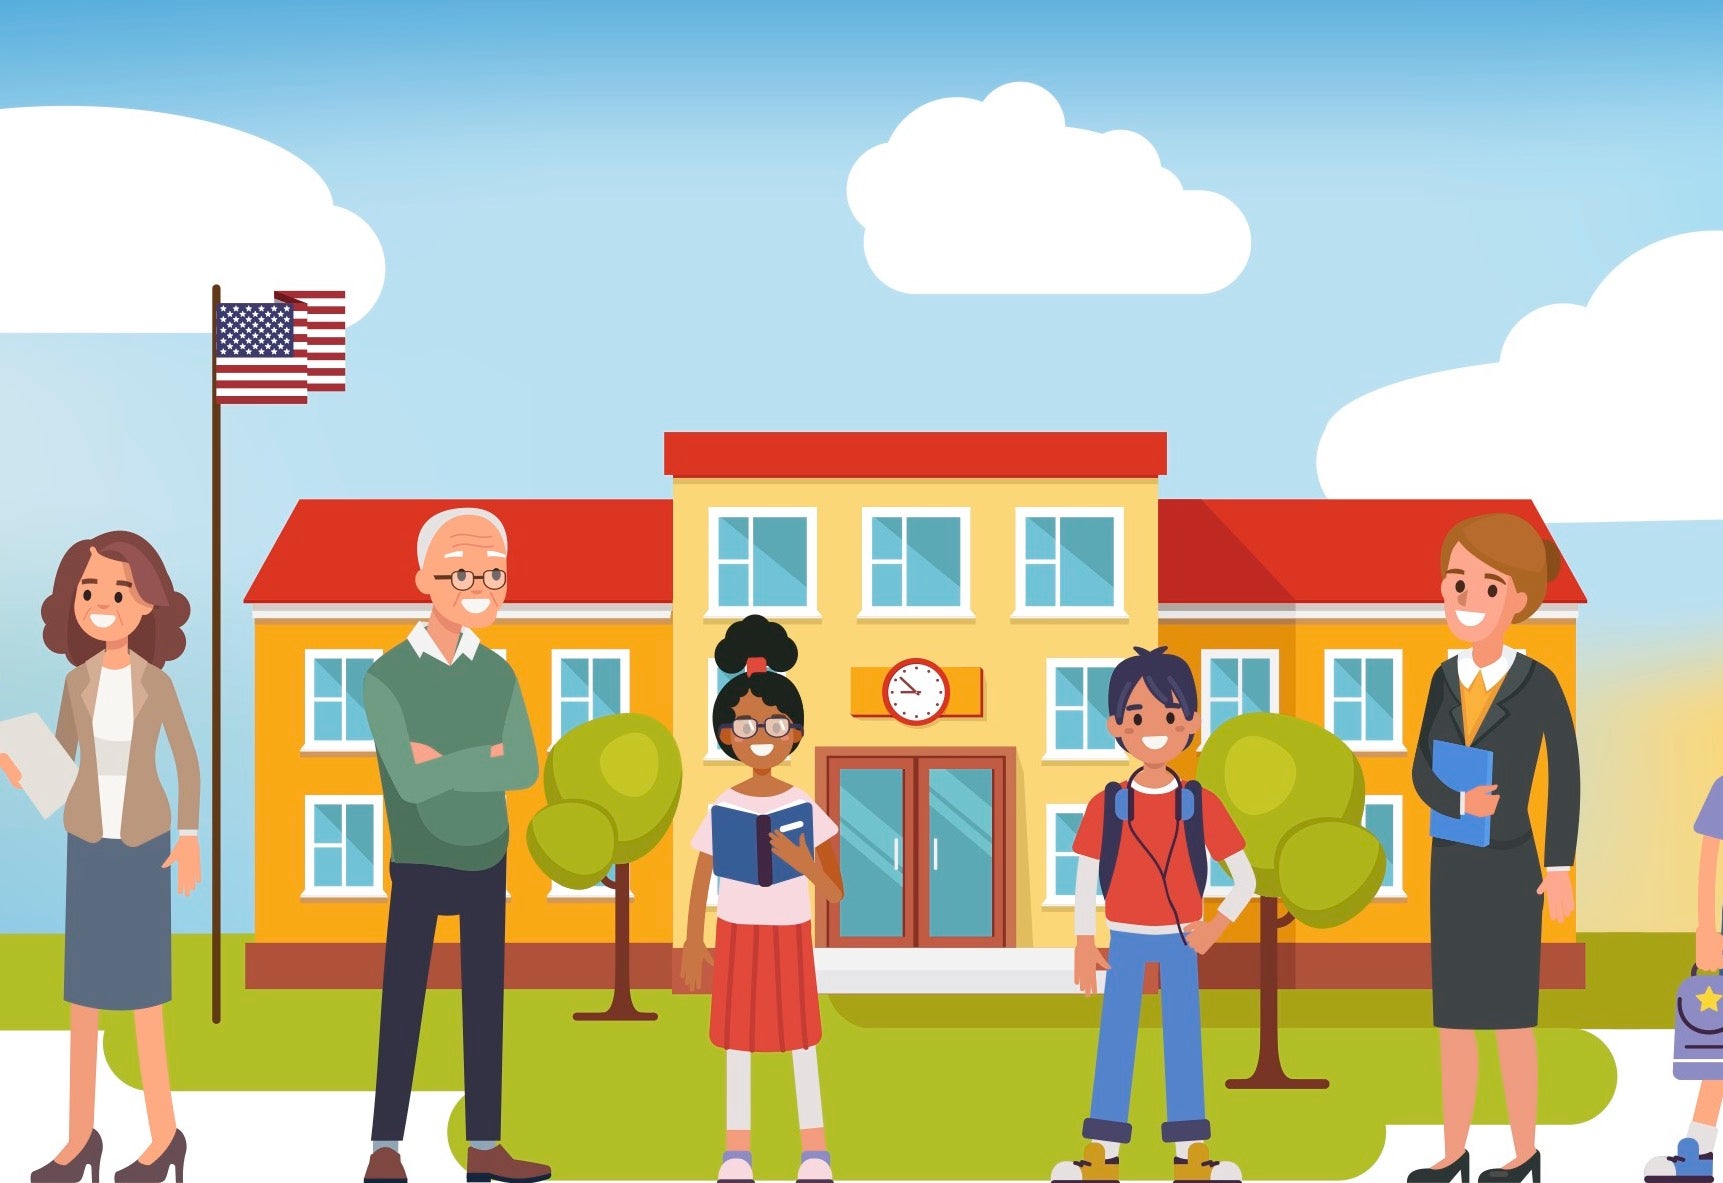 Illustration of students and teachers standing in front of a school.